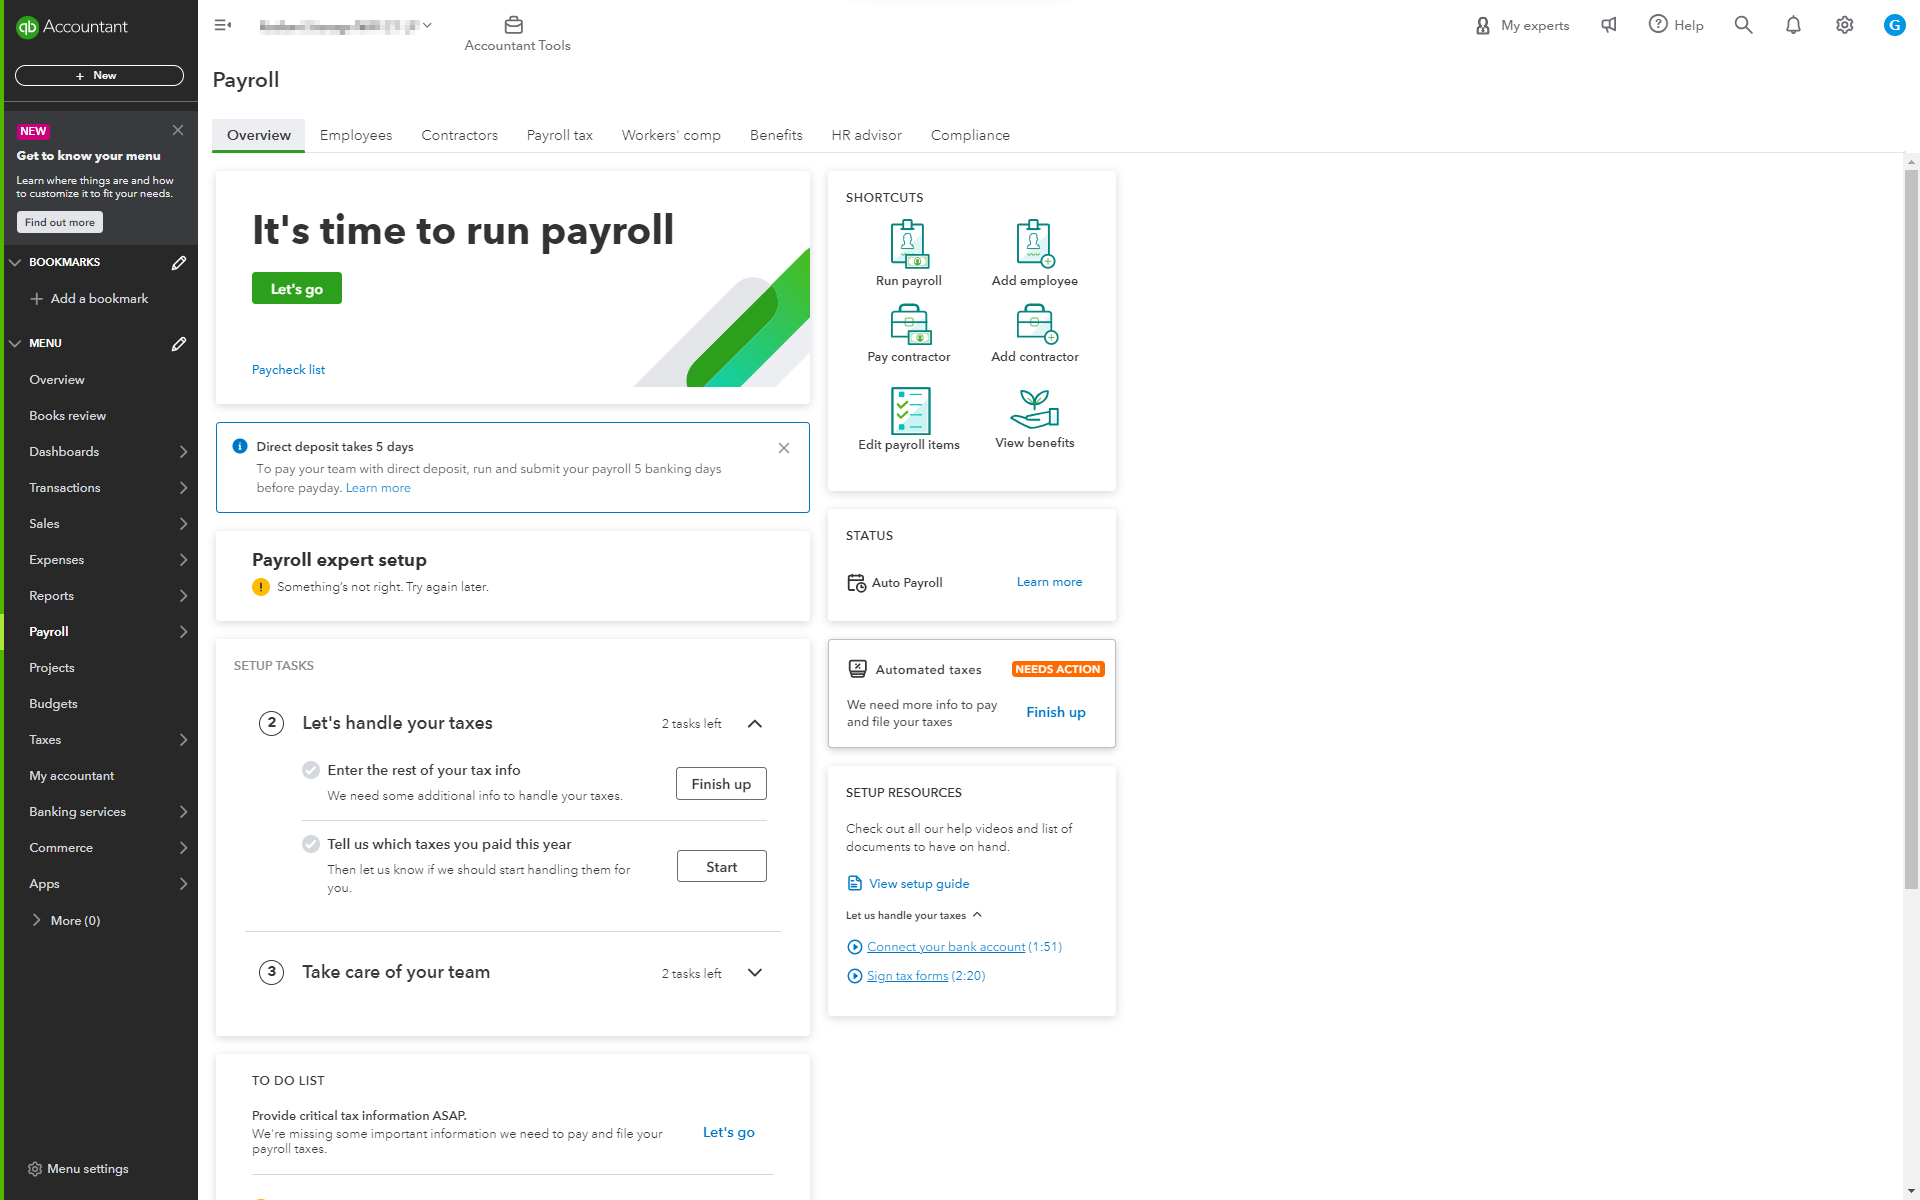 Hassle-free payroll management